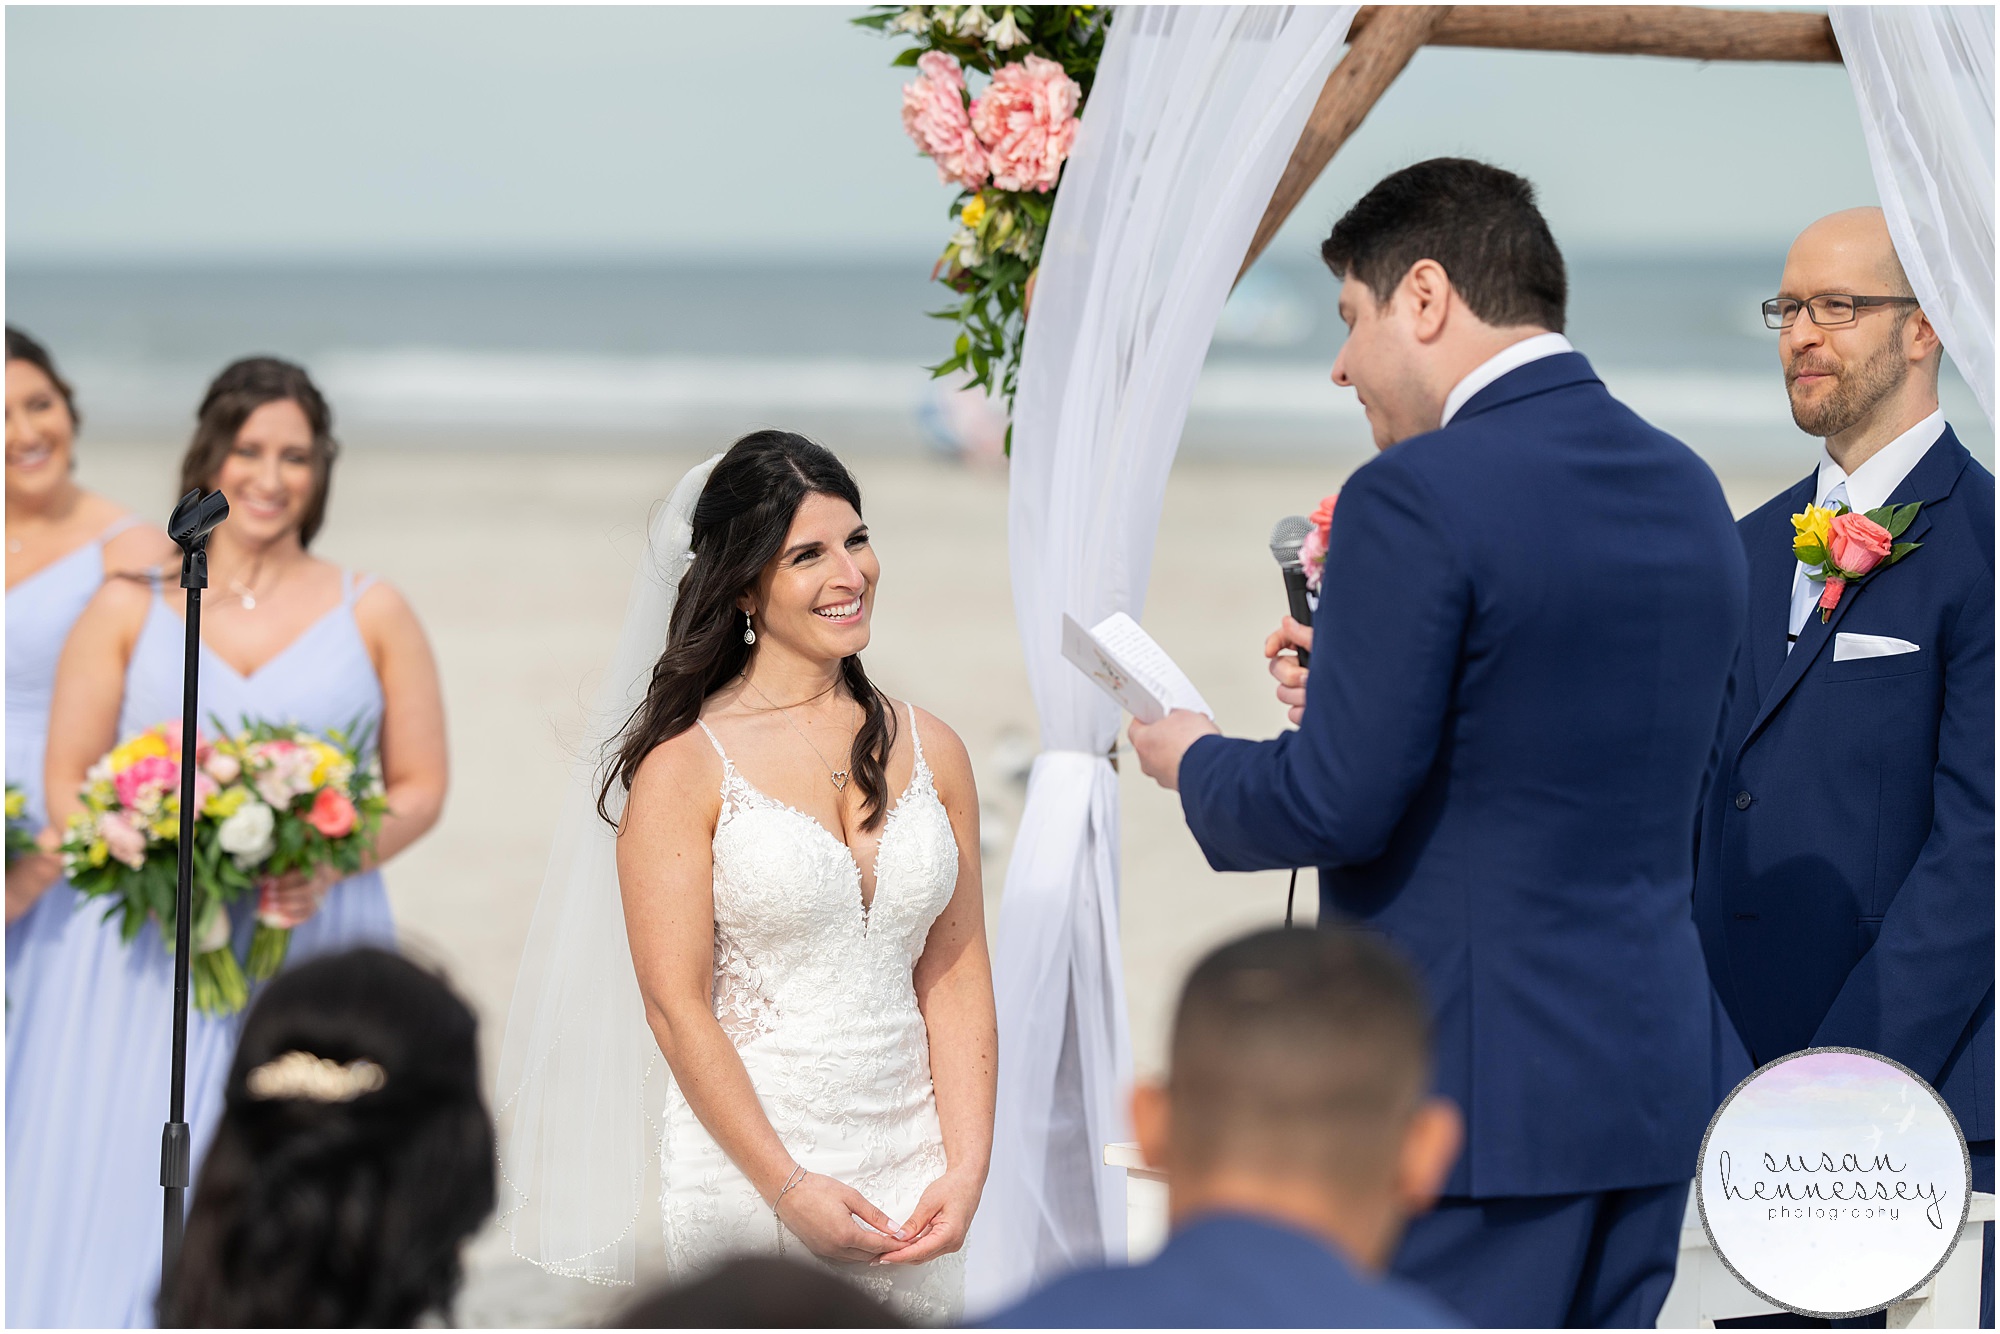 Personal vows at ICONA Avalon Wedding 